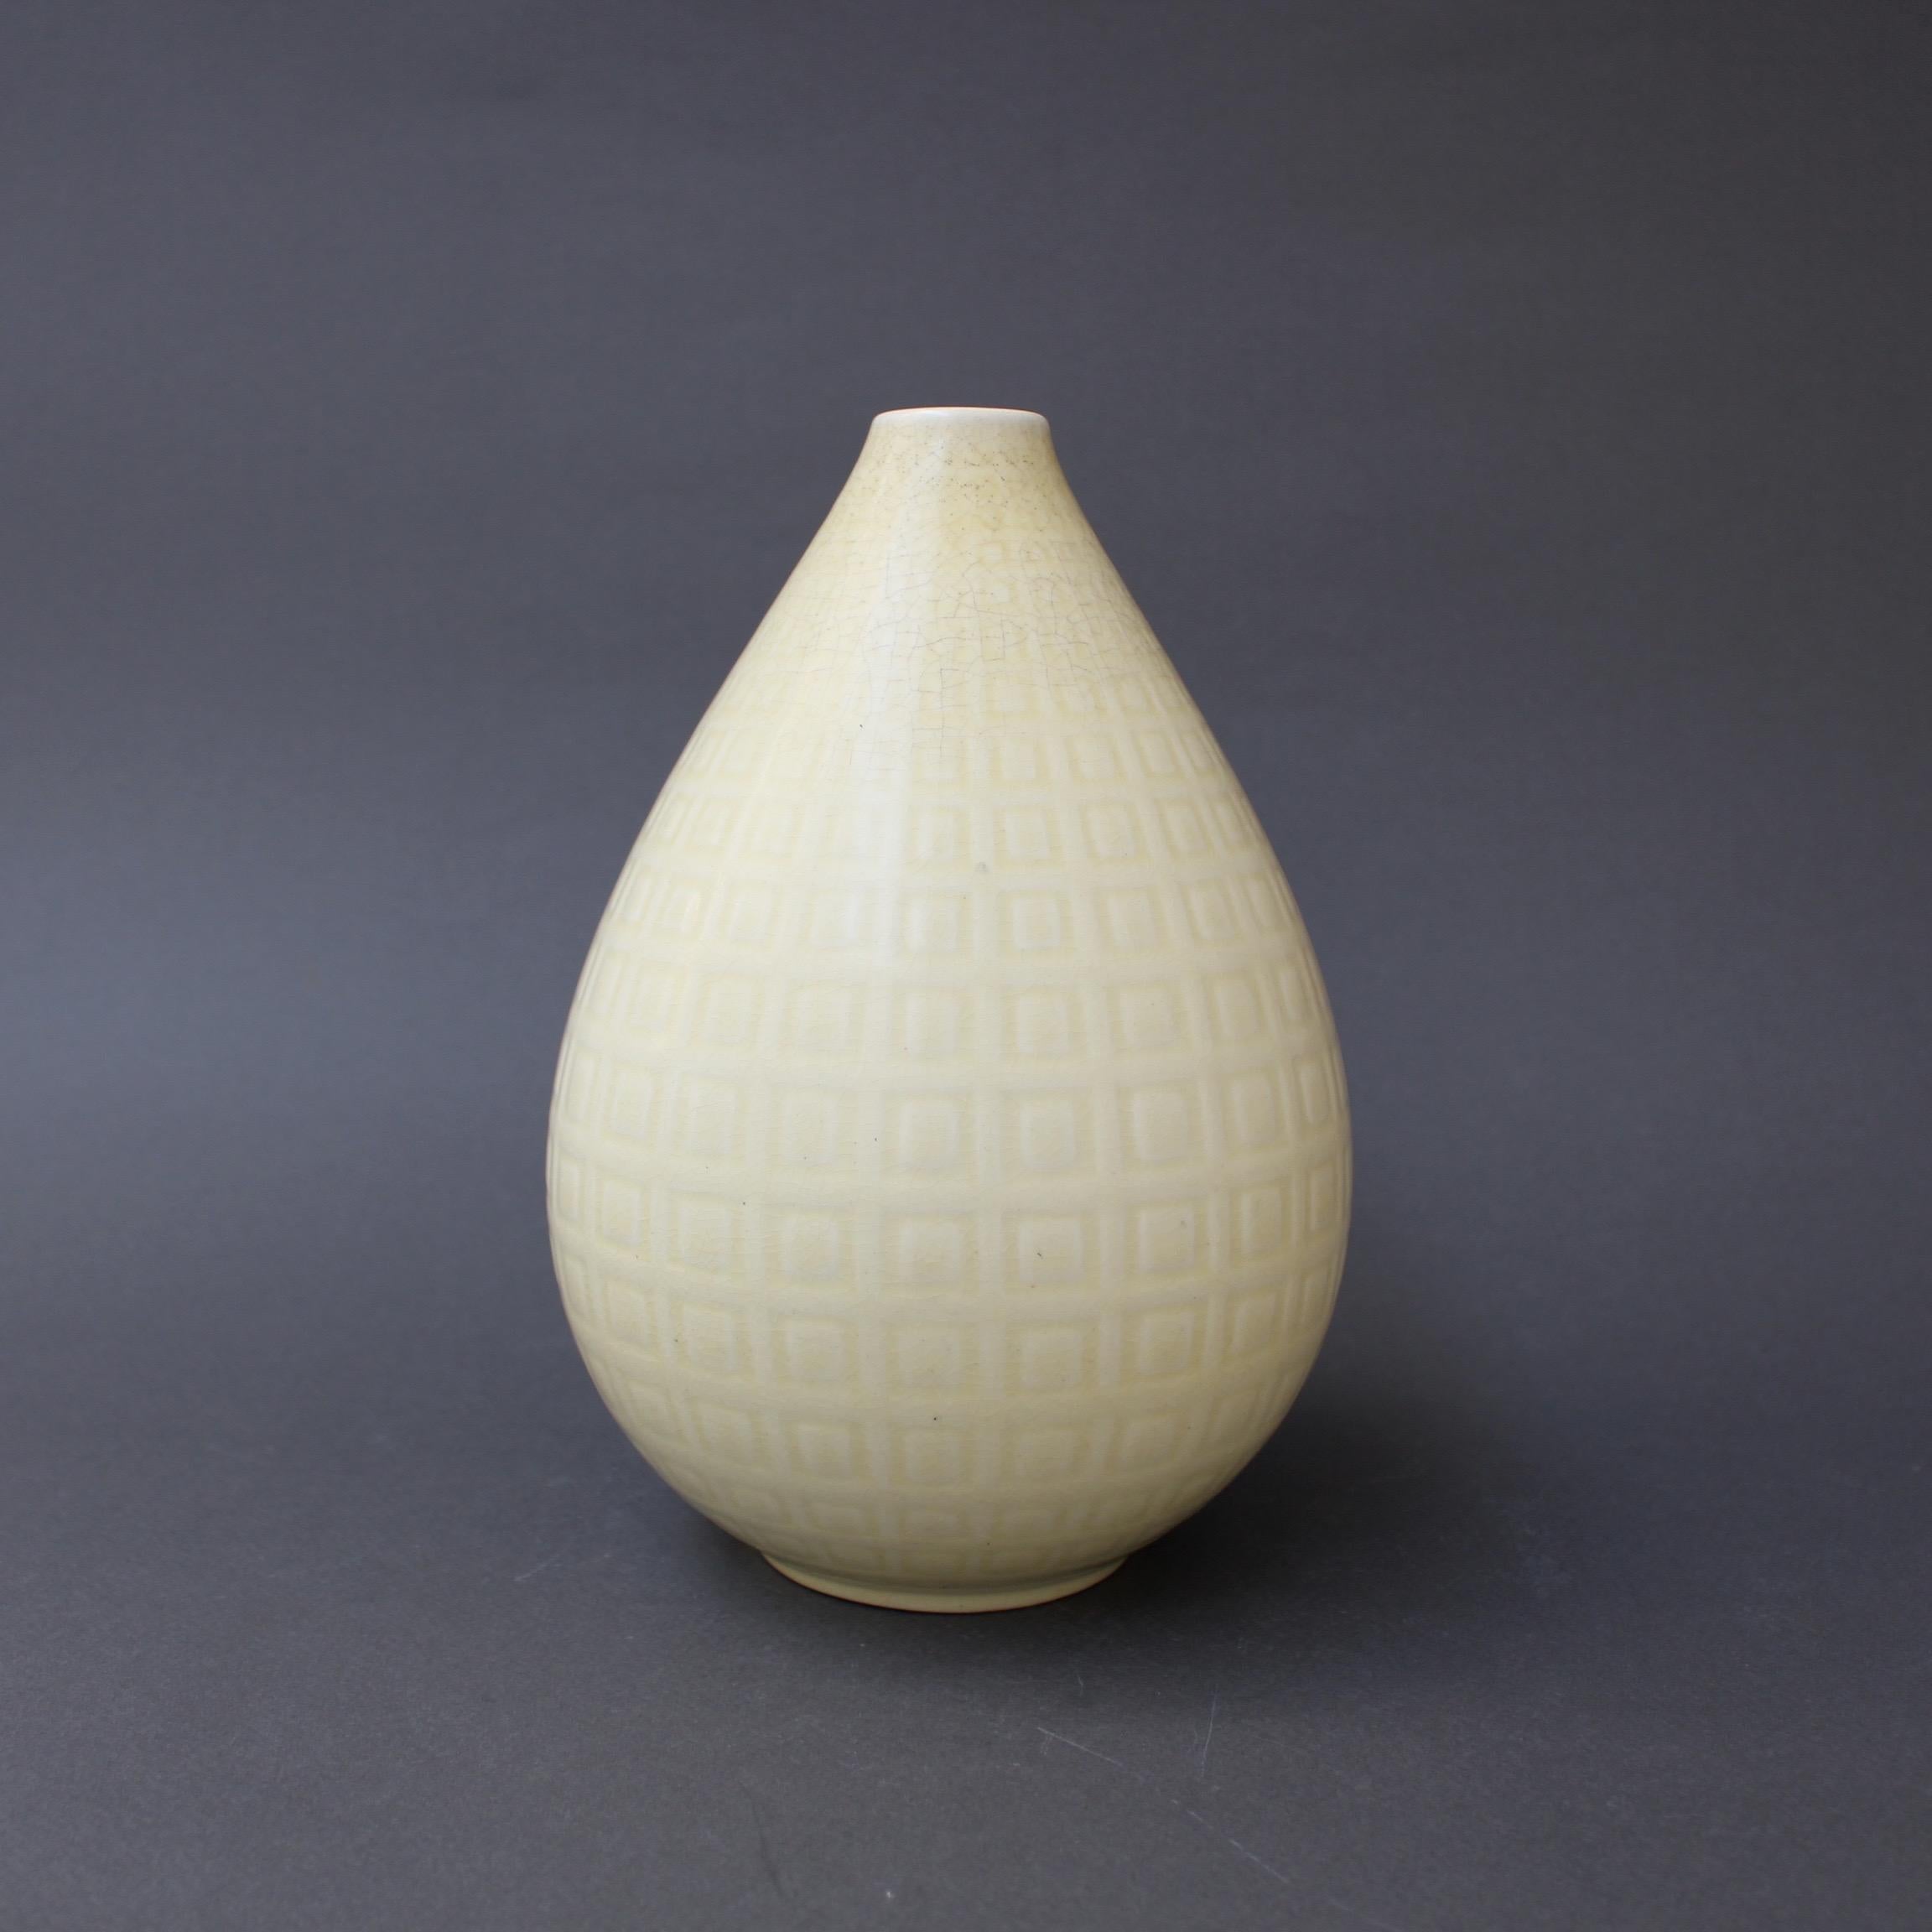 'Marselis' vase designed by Nils Thorsson for Aluminia - Royal Copenhagen, circa 1960s. A subtle square repeating pattern appears as the motif on a delicate beige and yellow teardrop-shaped flower vase. It is elegant with a light touch and very